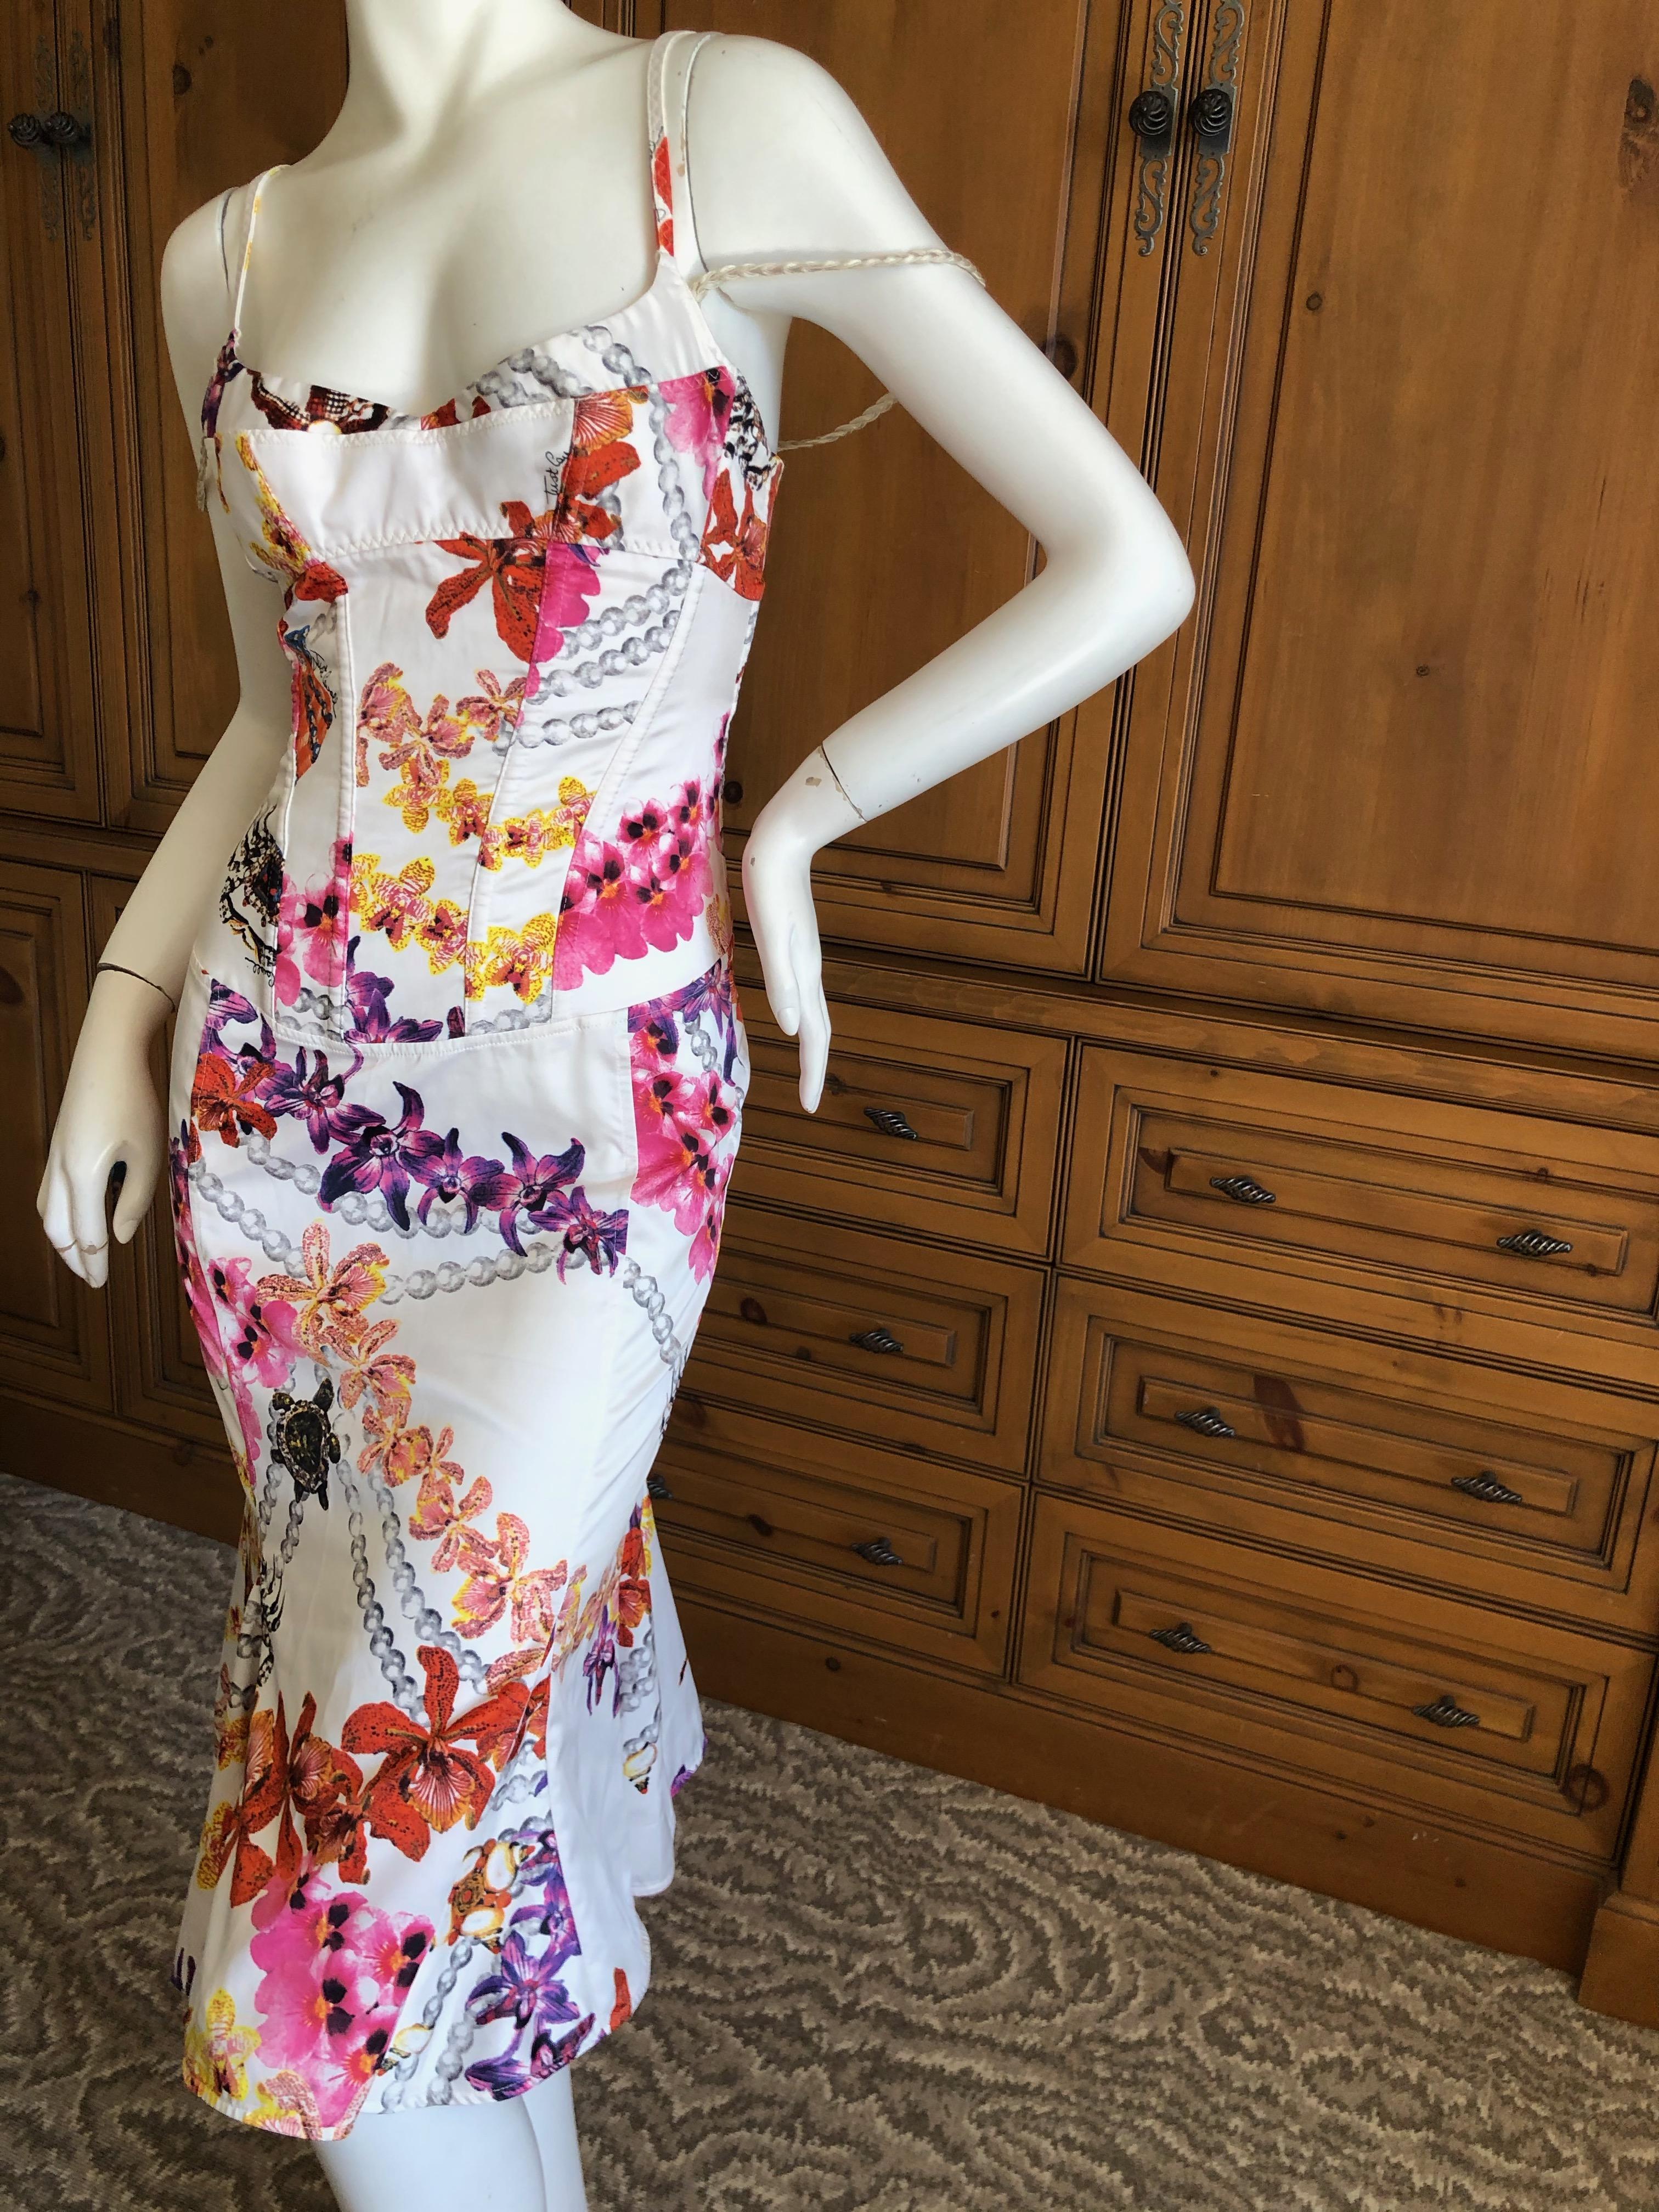 Roberto Cavalli for Just Cavalli Corset Top Orchid Print Cocktail Dress In Excellent Condition For Sale In Cloverdale, CA